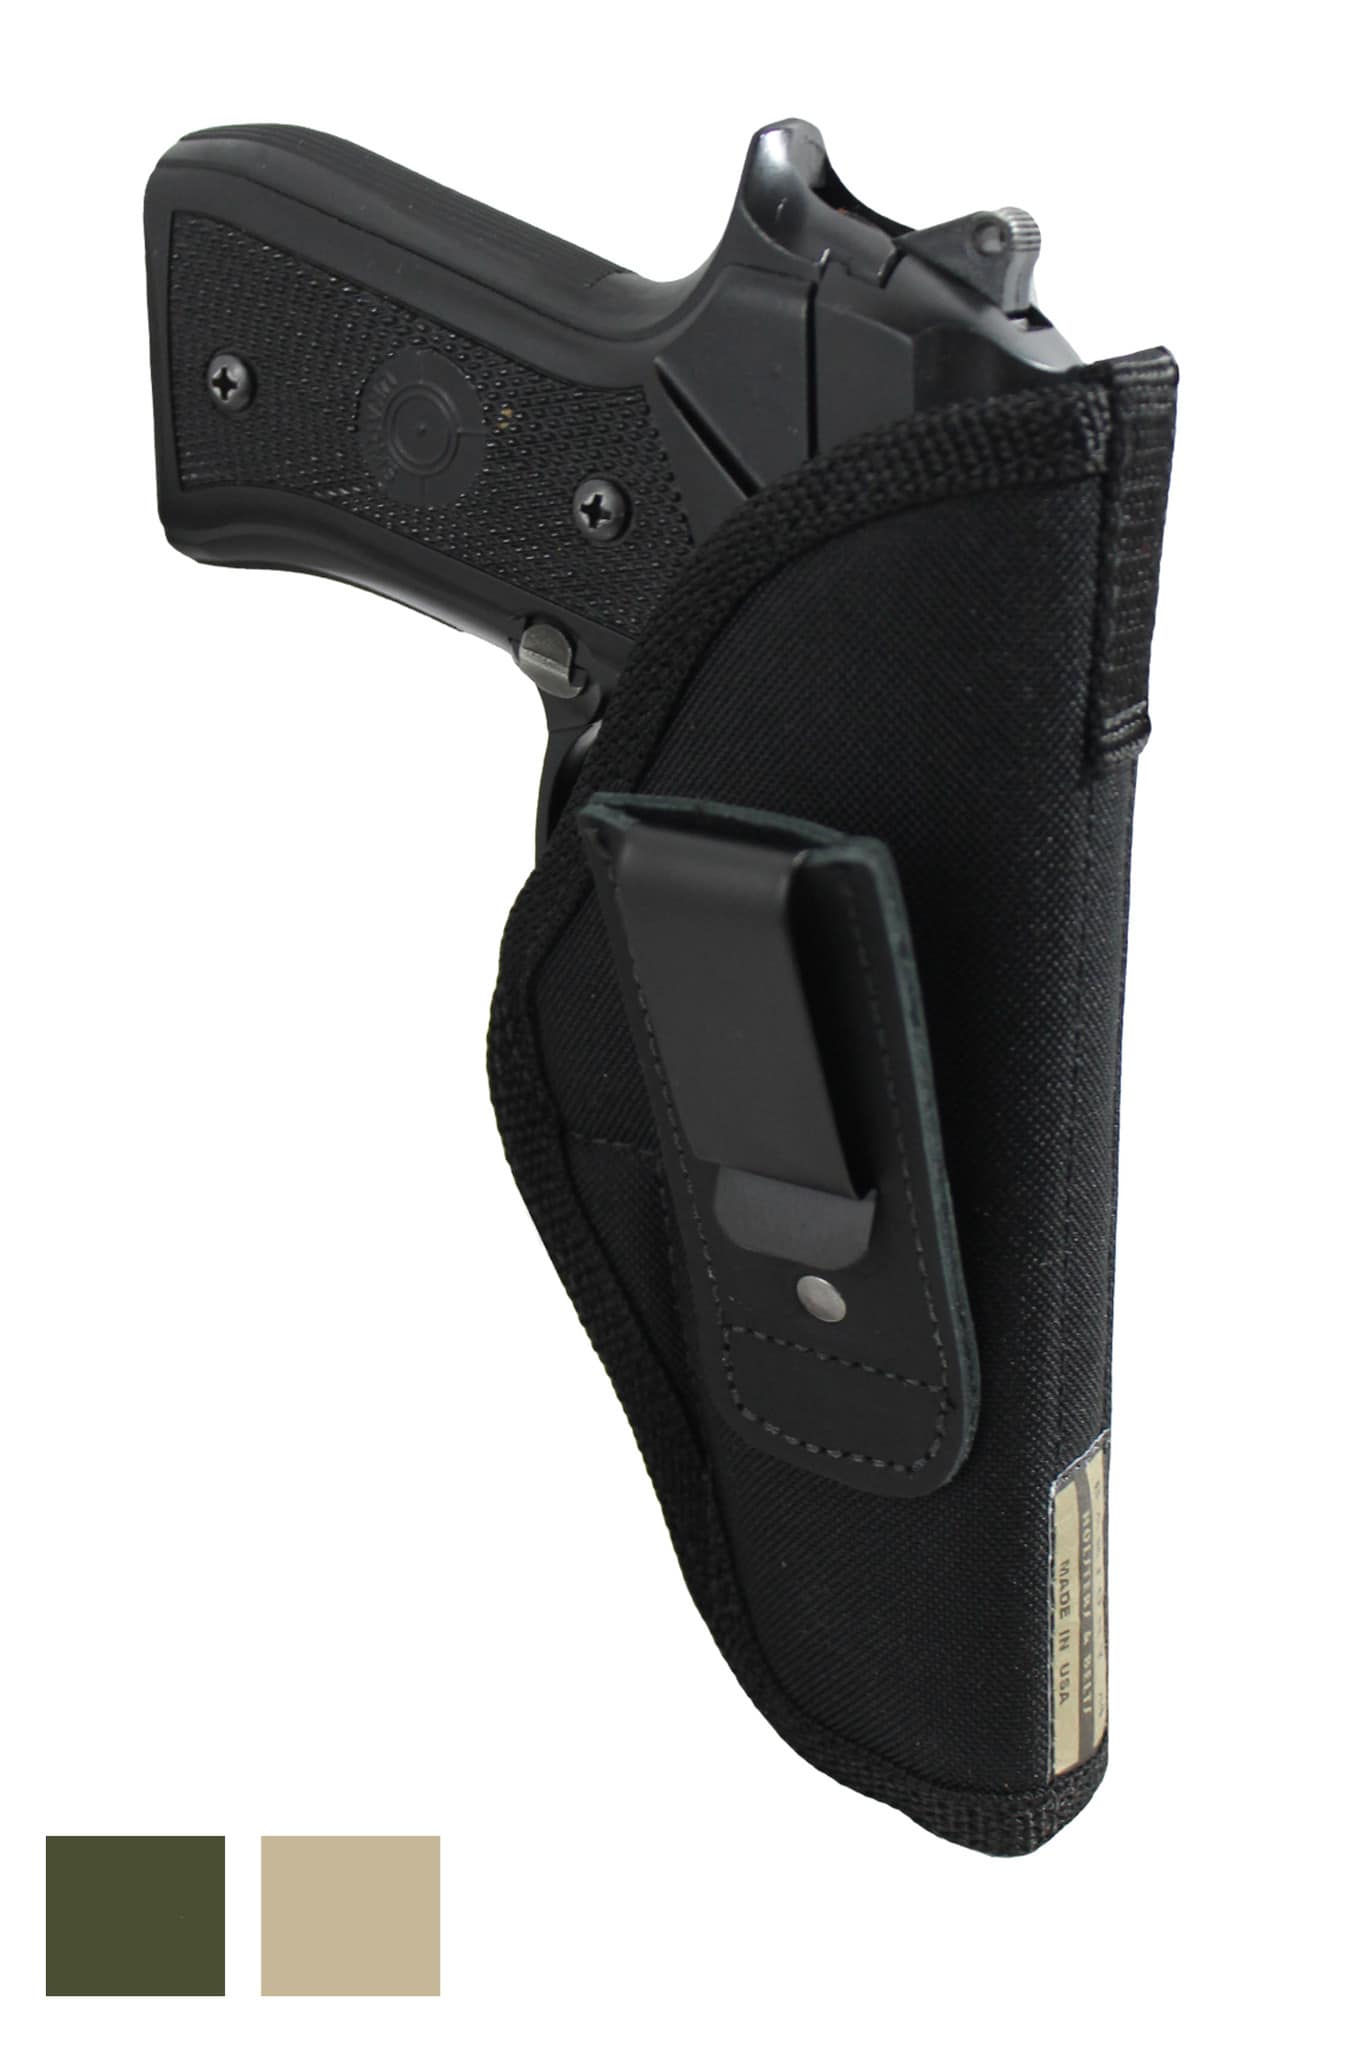 2. Understanding the Importance of Comfort in Full-Size Pistol Holsters